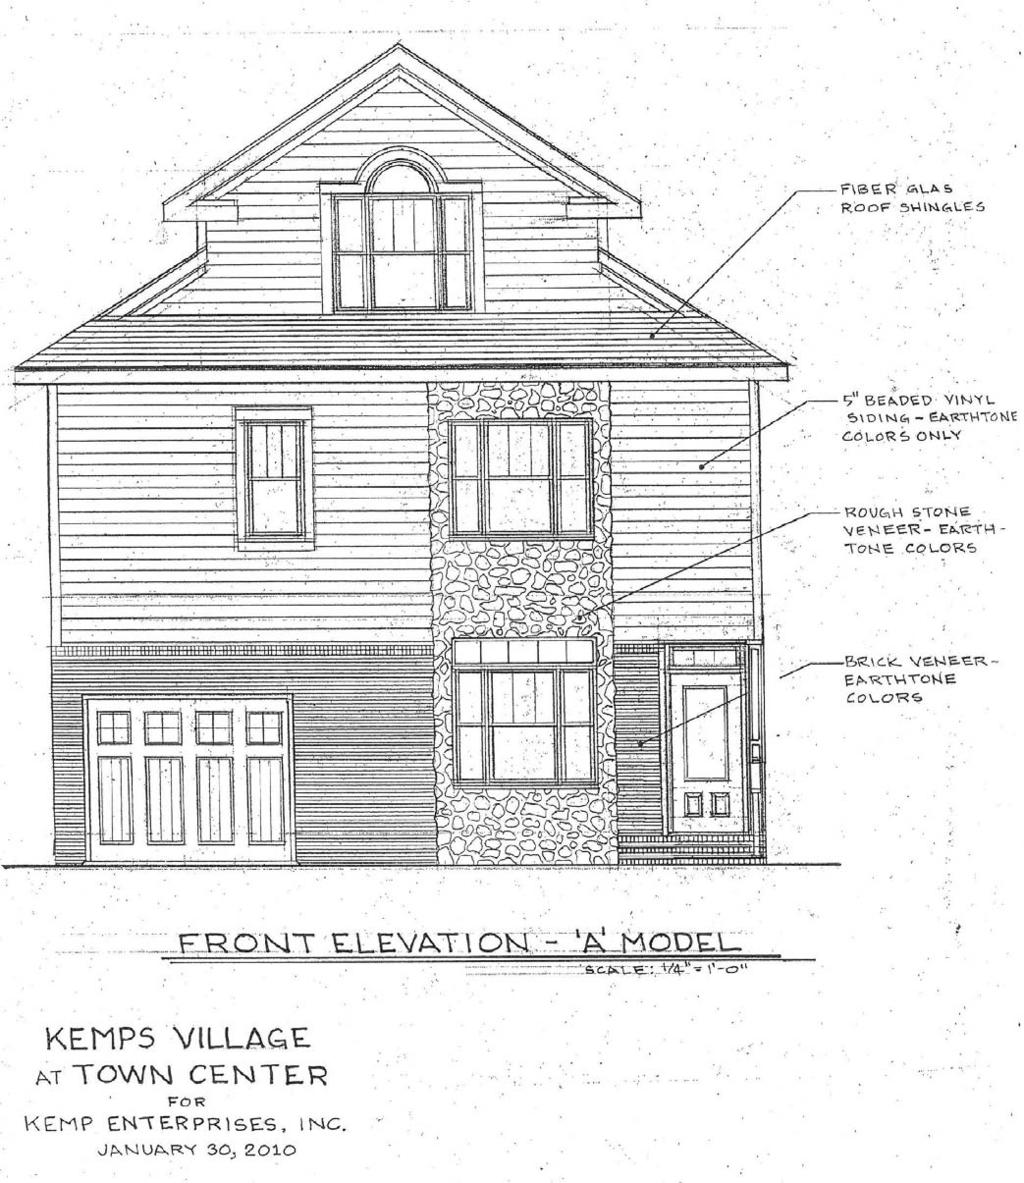 PROPOSED BUILDING